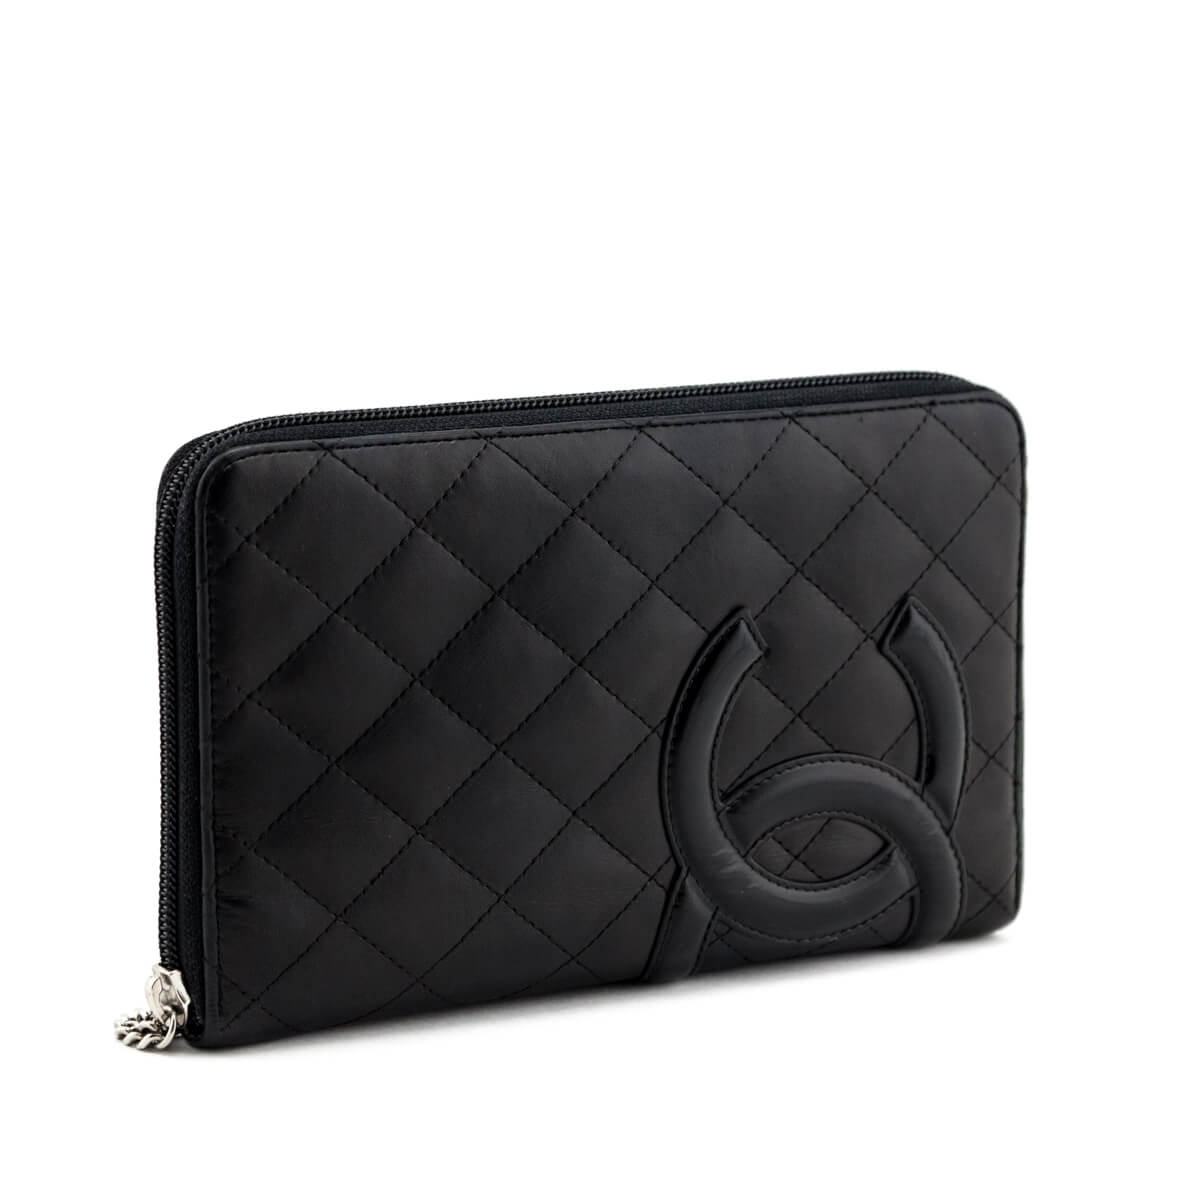 Chanel Black Quilted Calfskin Cambon Zip Around Organizer Wallet - Love that Bag etc - Preowned Authentic Designer Handbags & Preloved Fashions